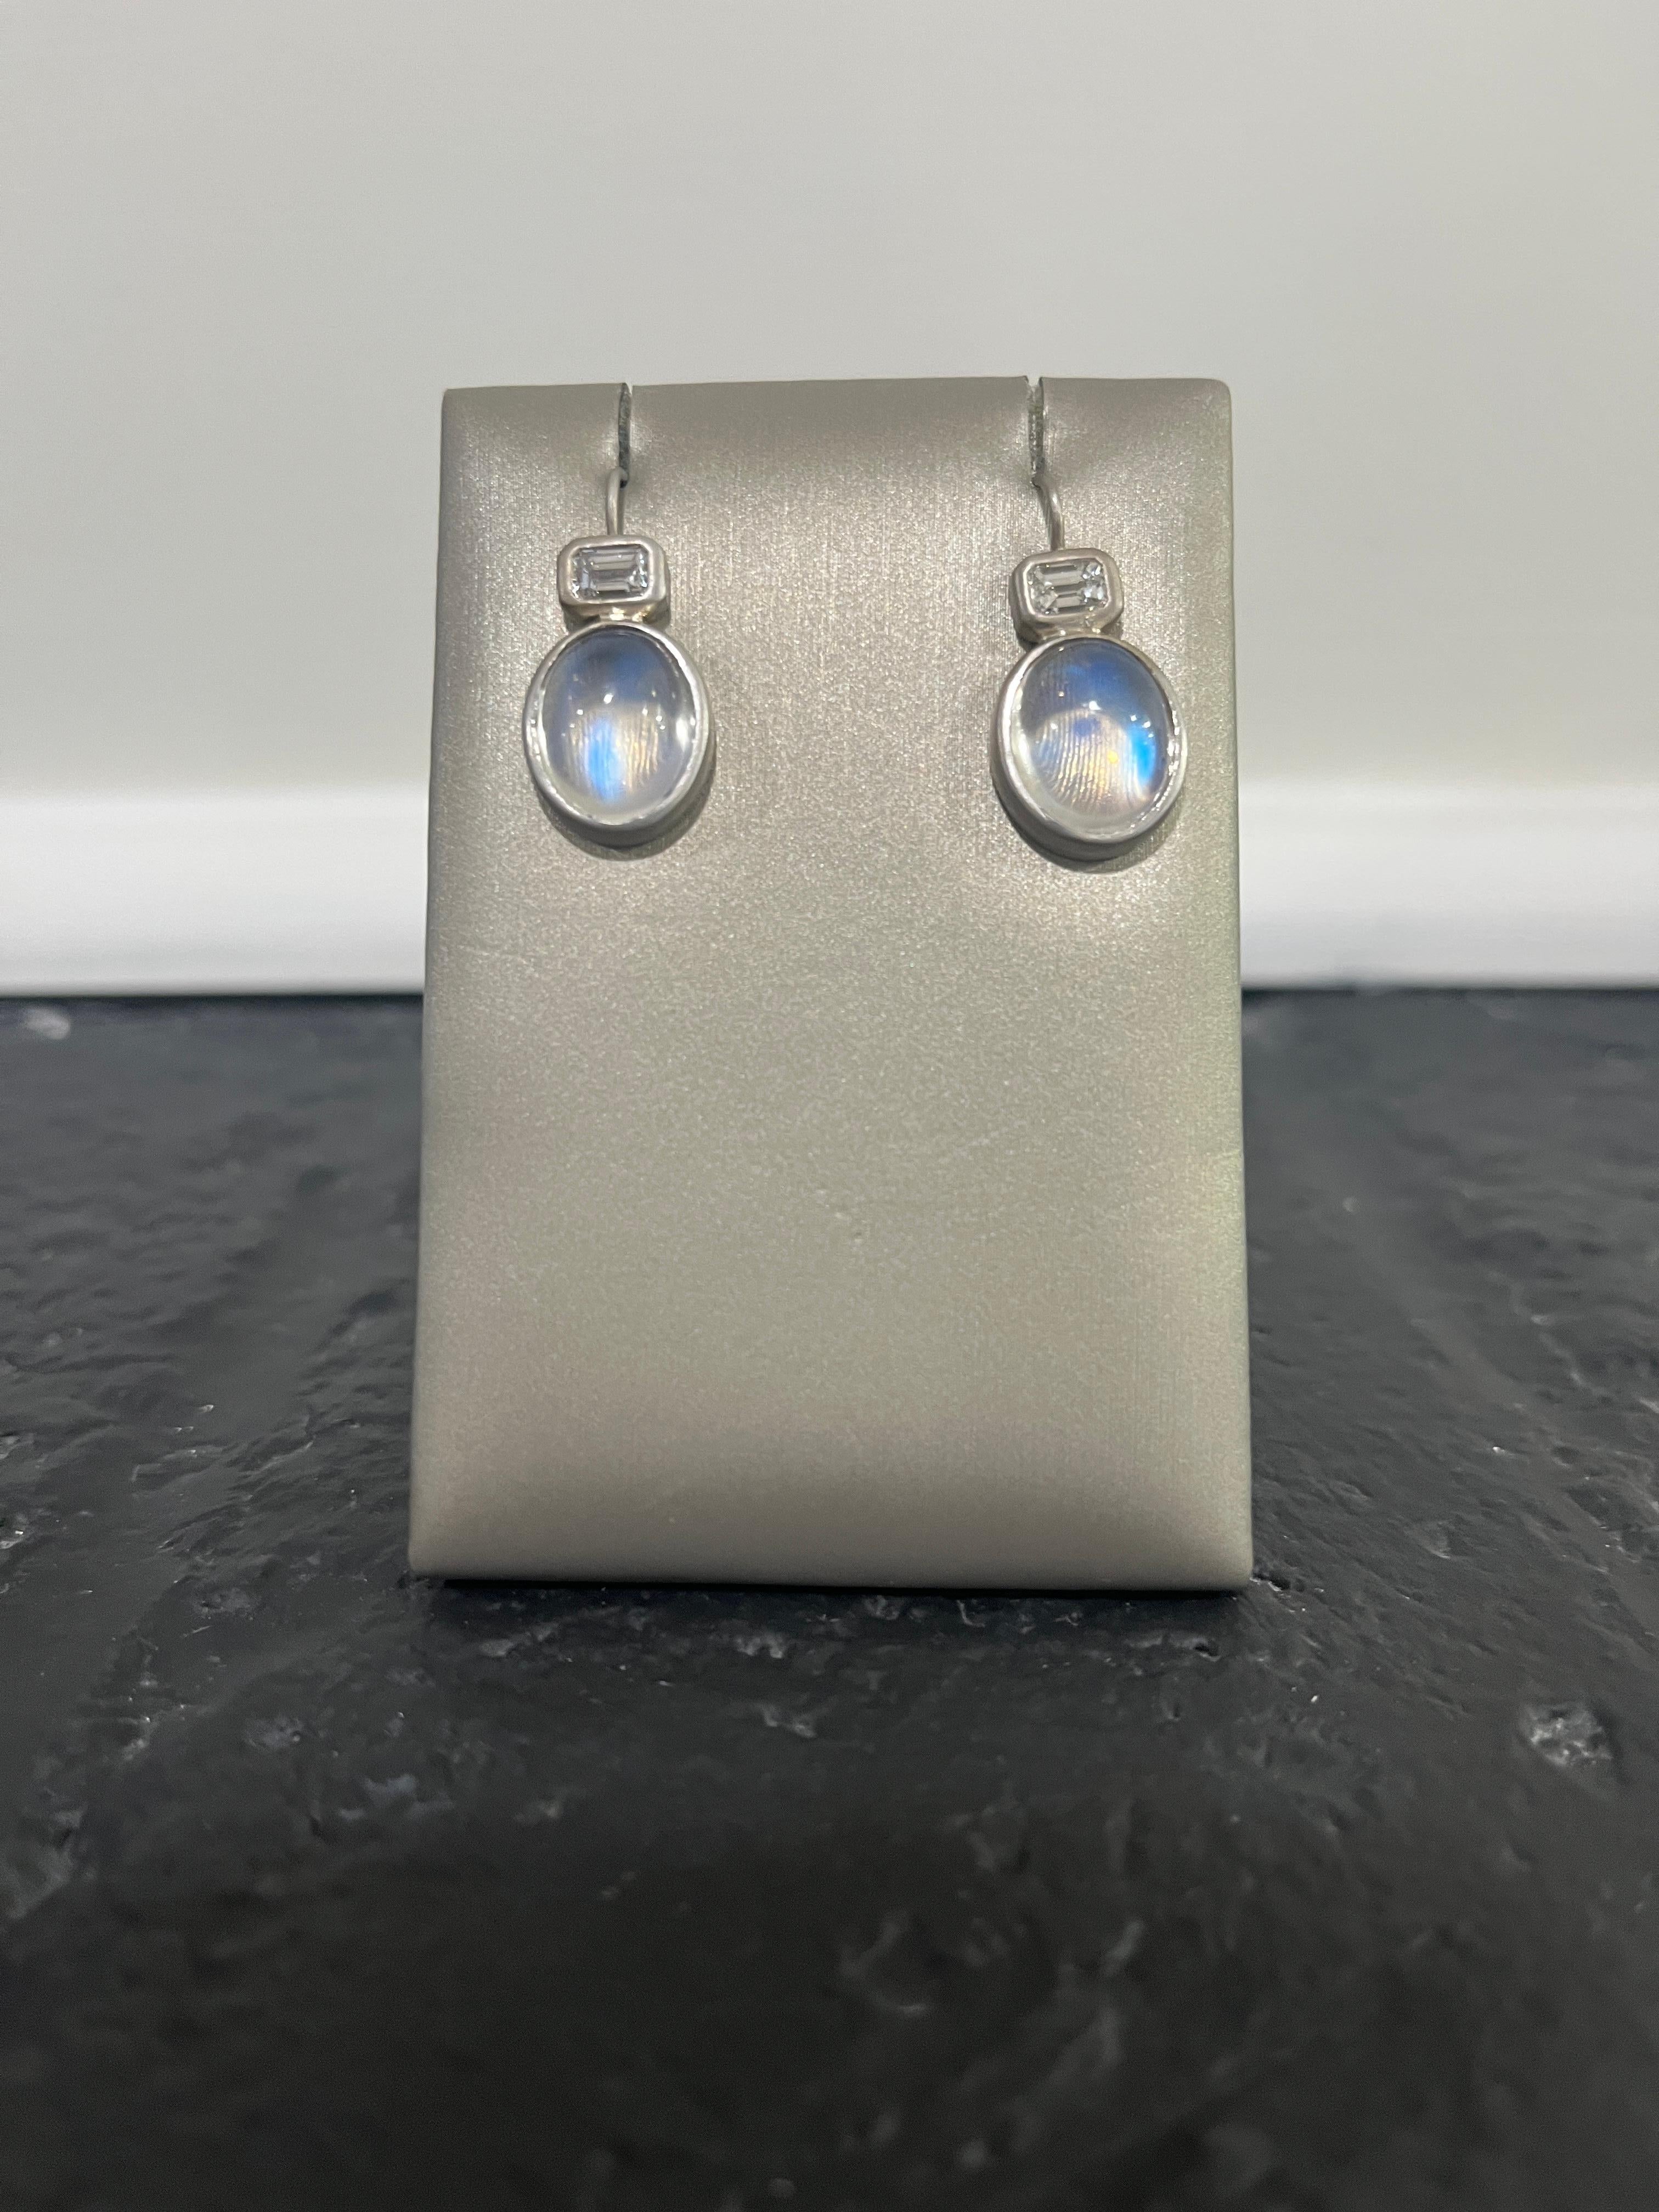 Faye Kim's 18 Karat White Gold Ceylon Moonstone Diamond Earrings feature matched luminscent moonstones; this gemstone is said to resemble moonlight shining through a bed of clouds. The matte white gold finish enhances the moonstones' striking